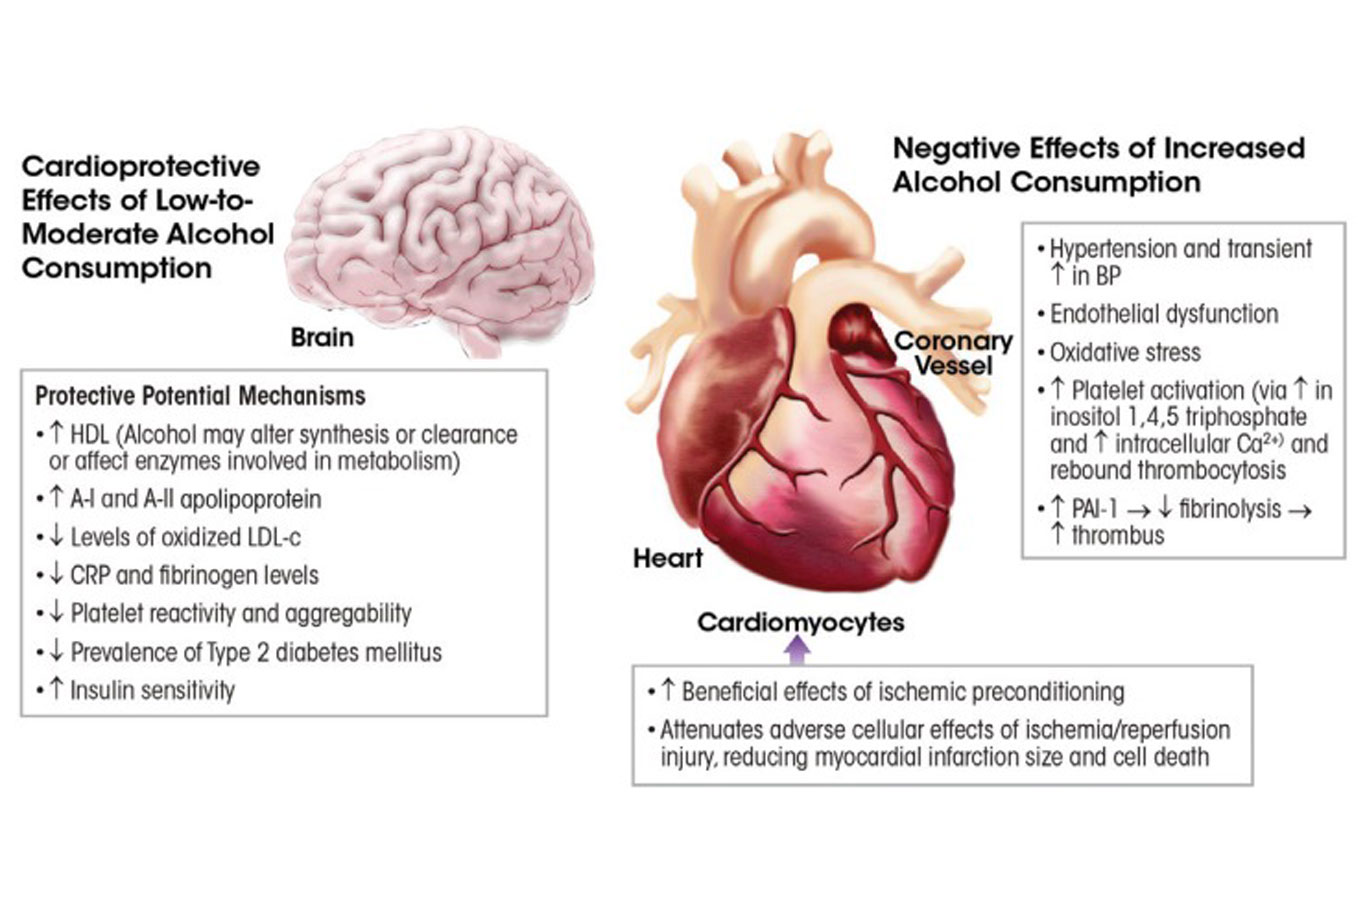 Alcohol's Impact on Heart Health and Stress Response Explored